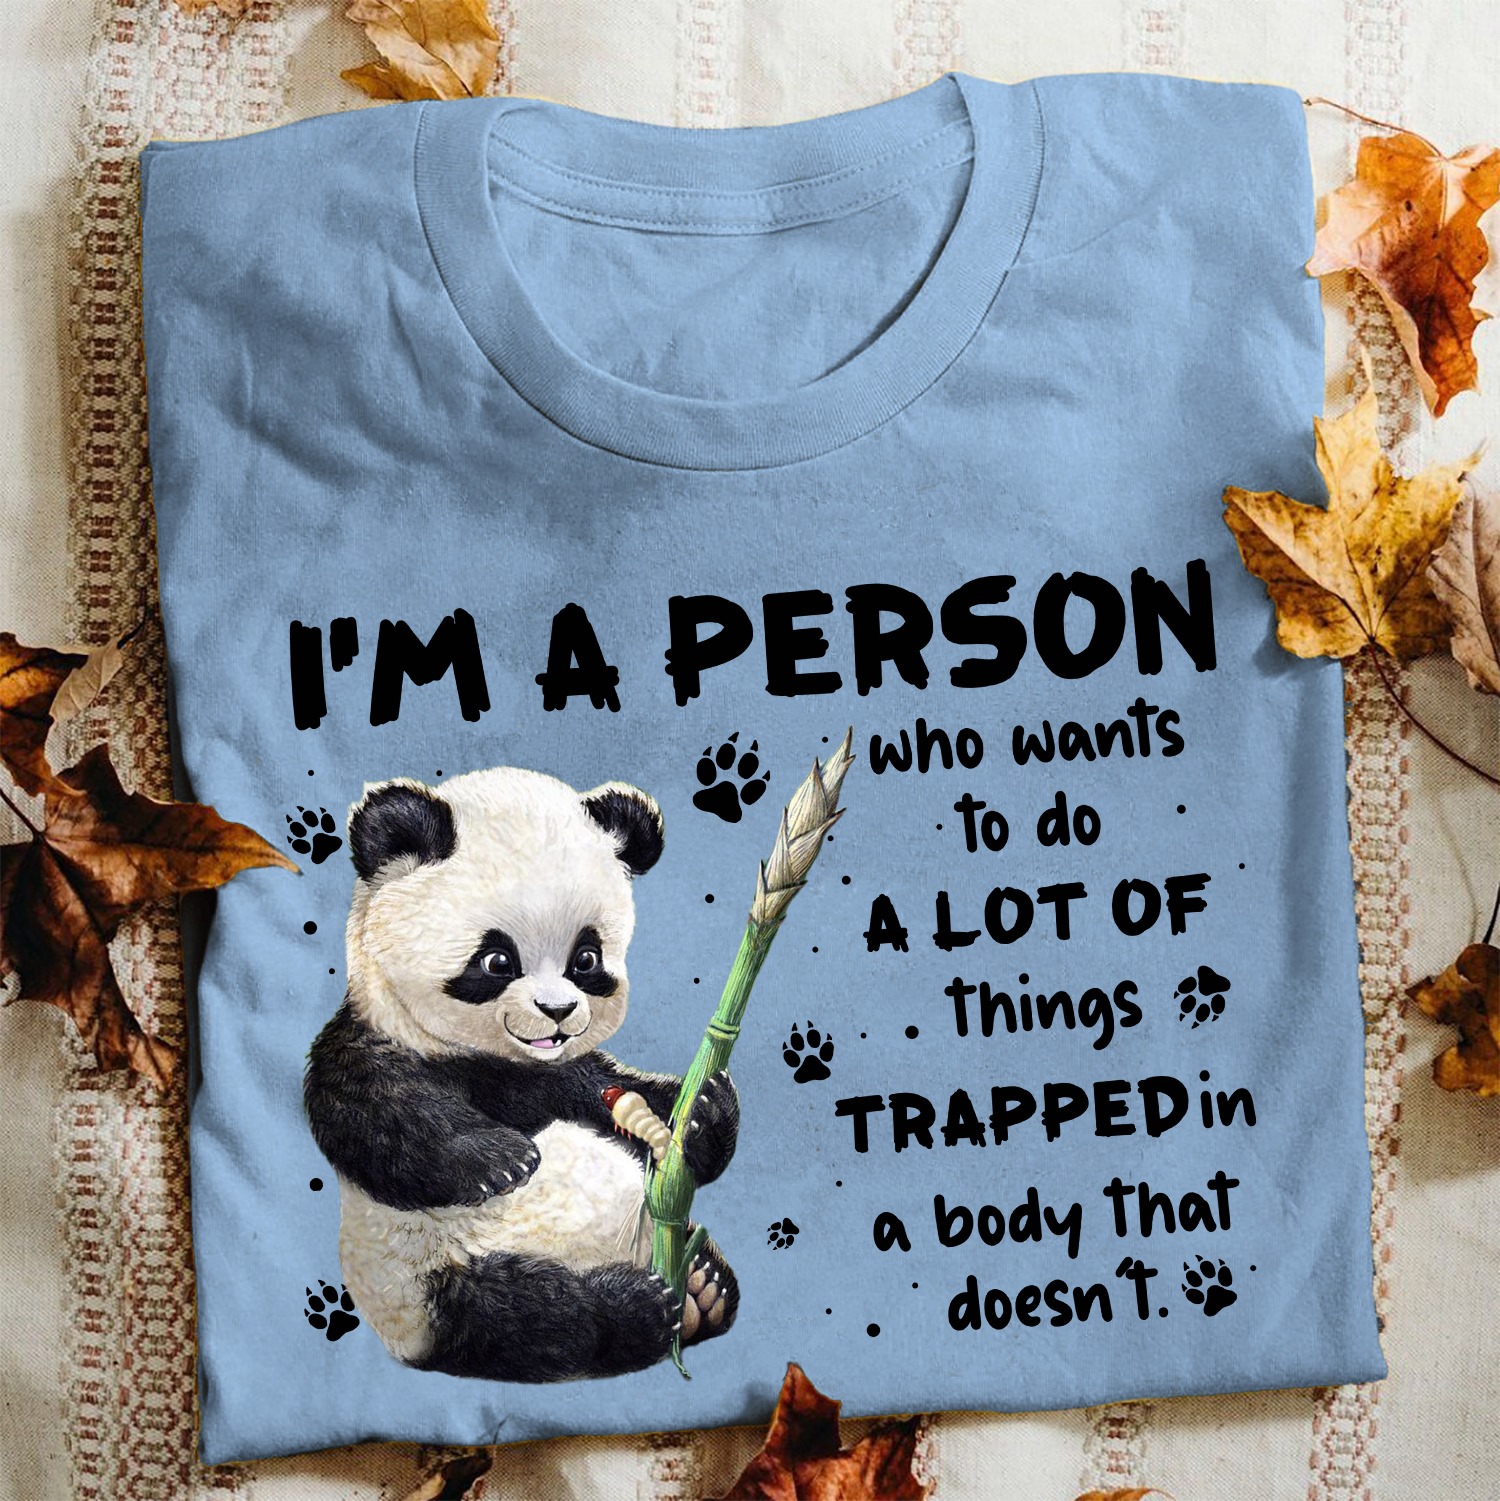 I'm a person who wants to do a lot of things trapped in a body that doesn't - Panda lover